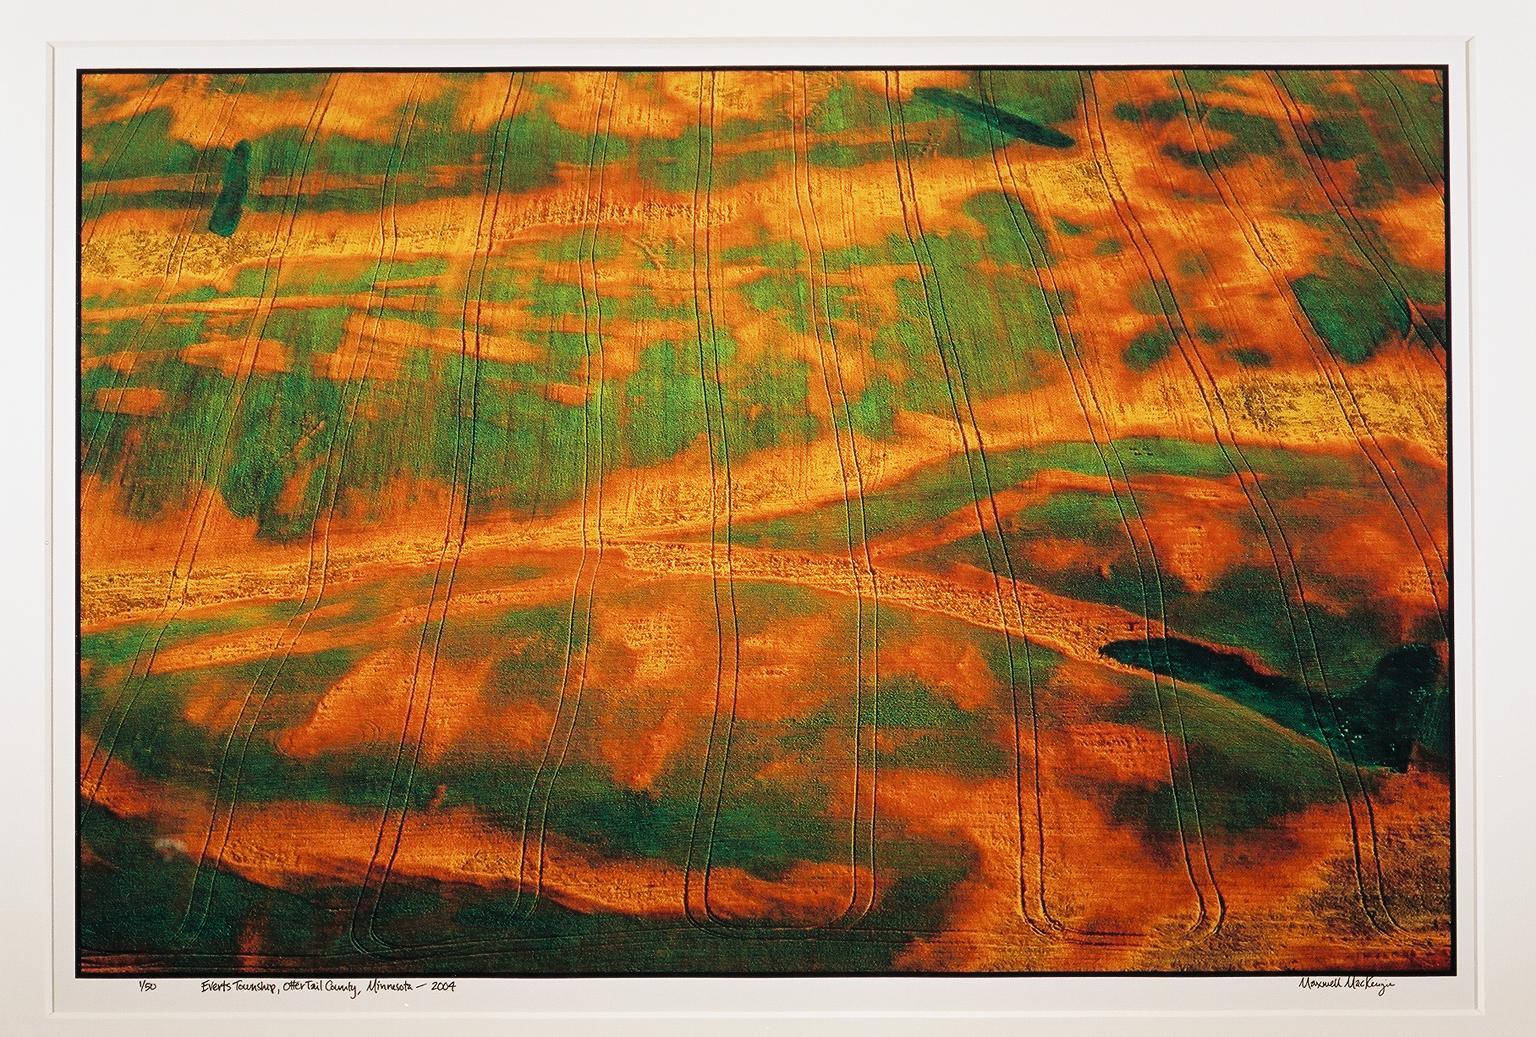 Maxwell Mackenzie Landscape Photograph - "Everts Aerial, Otter Tail CO, MN" patterns with green and orange paint fields